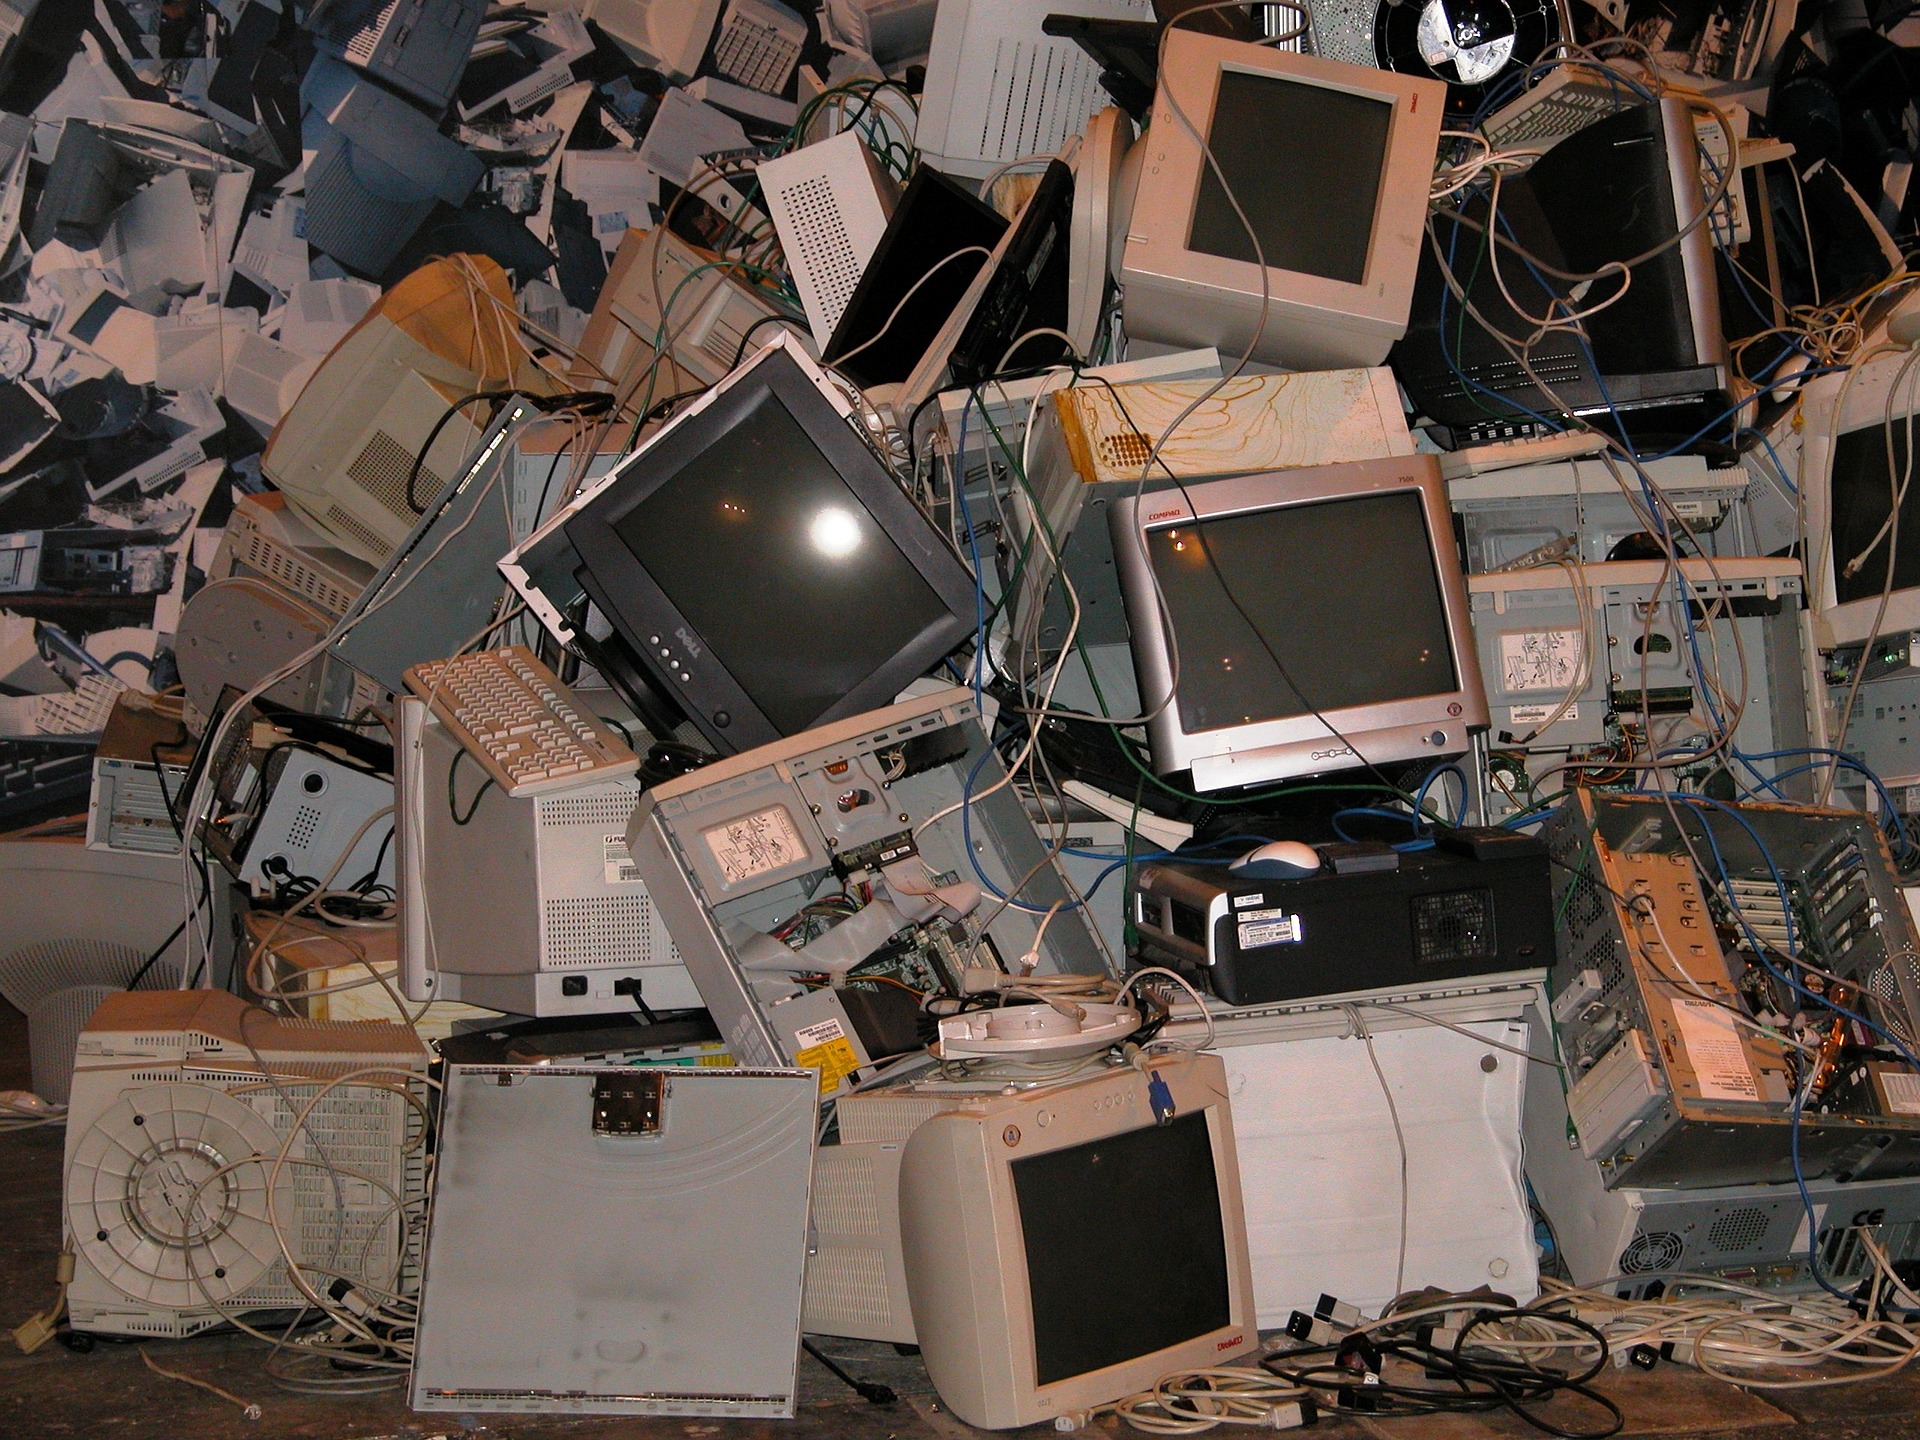 Why is EPR needed? Nigeria’s e-waste crisis